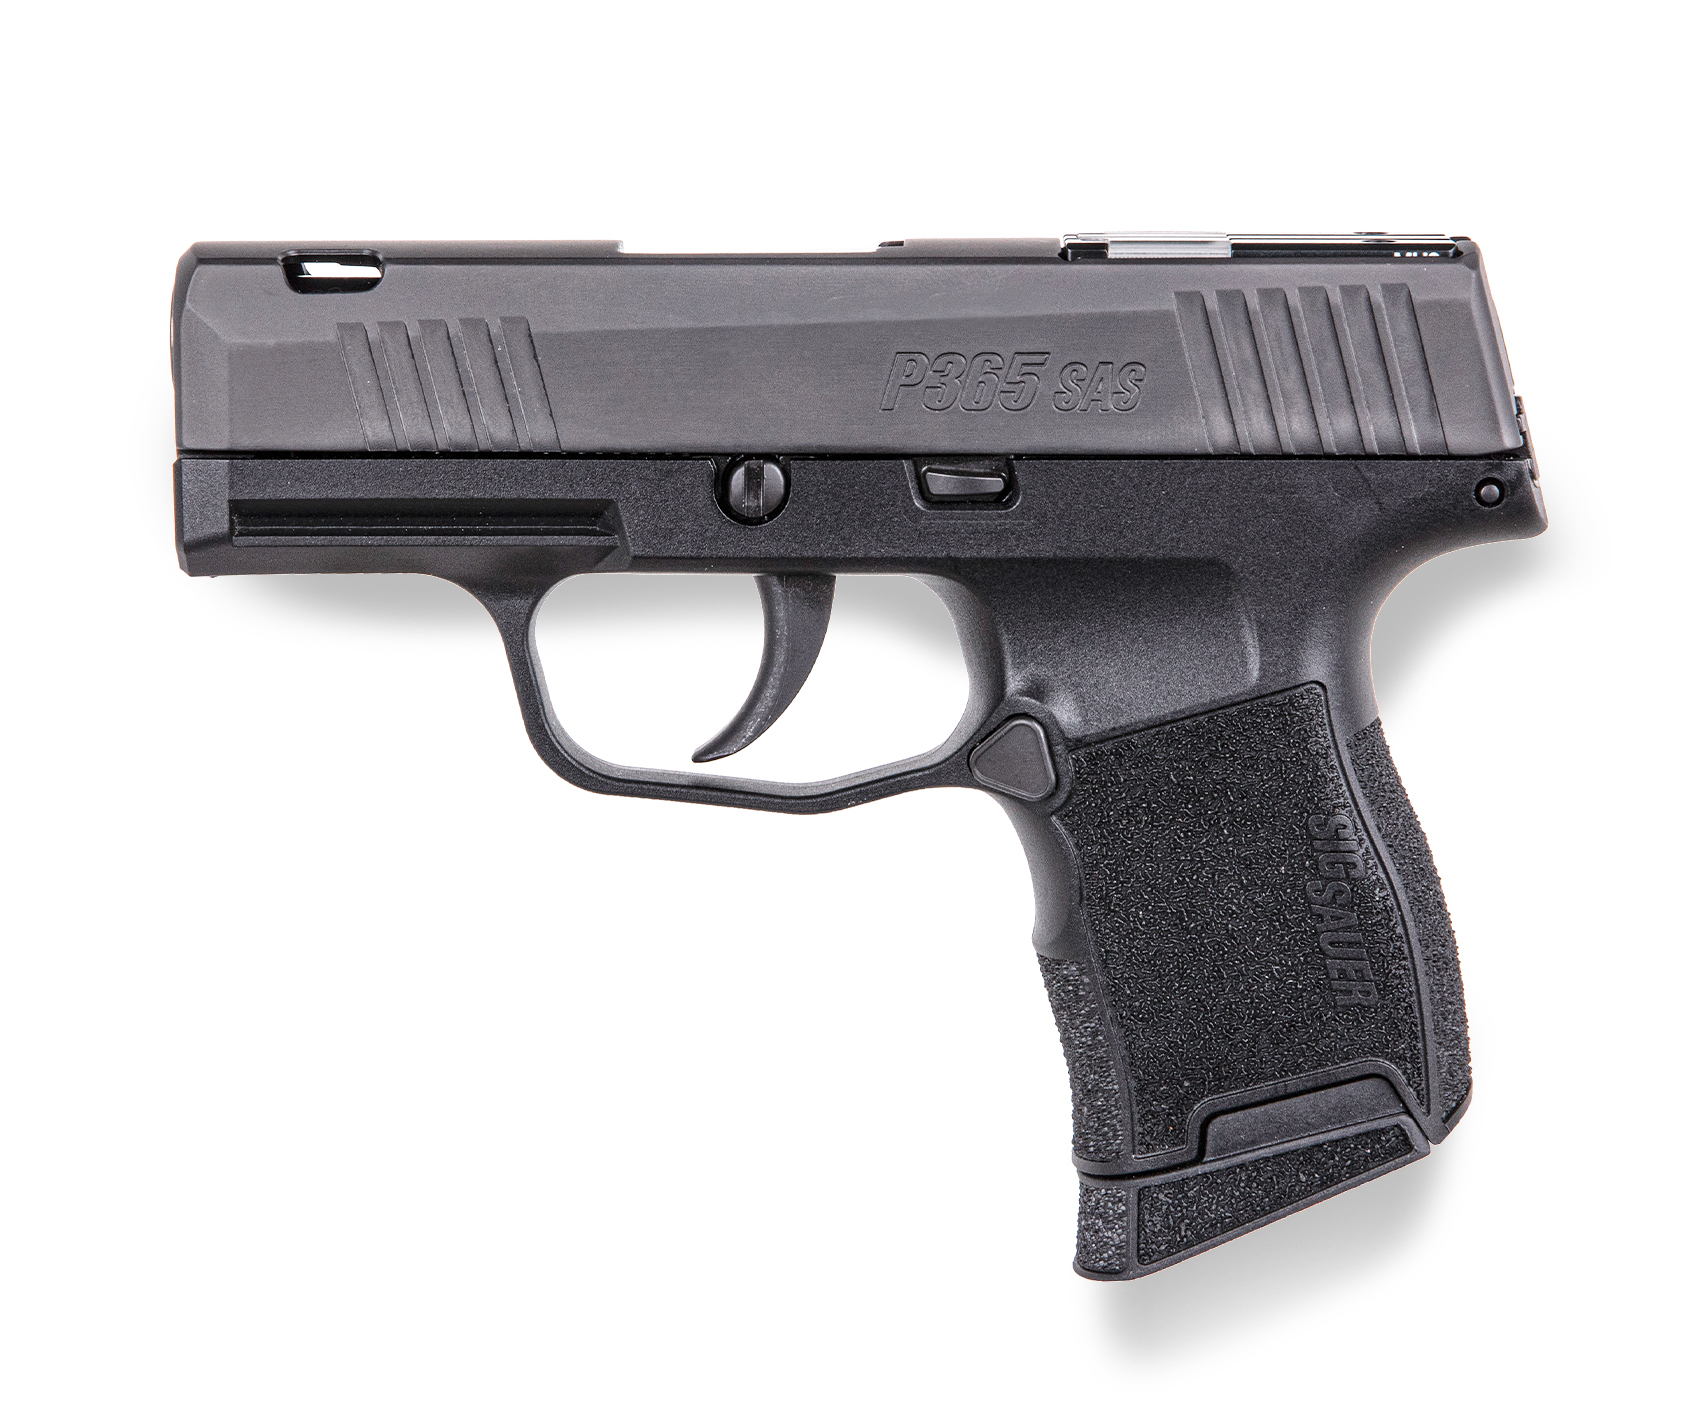  Sig Sauer P365 vs Glock 43 | Which one is better?